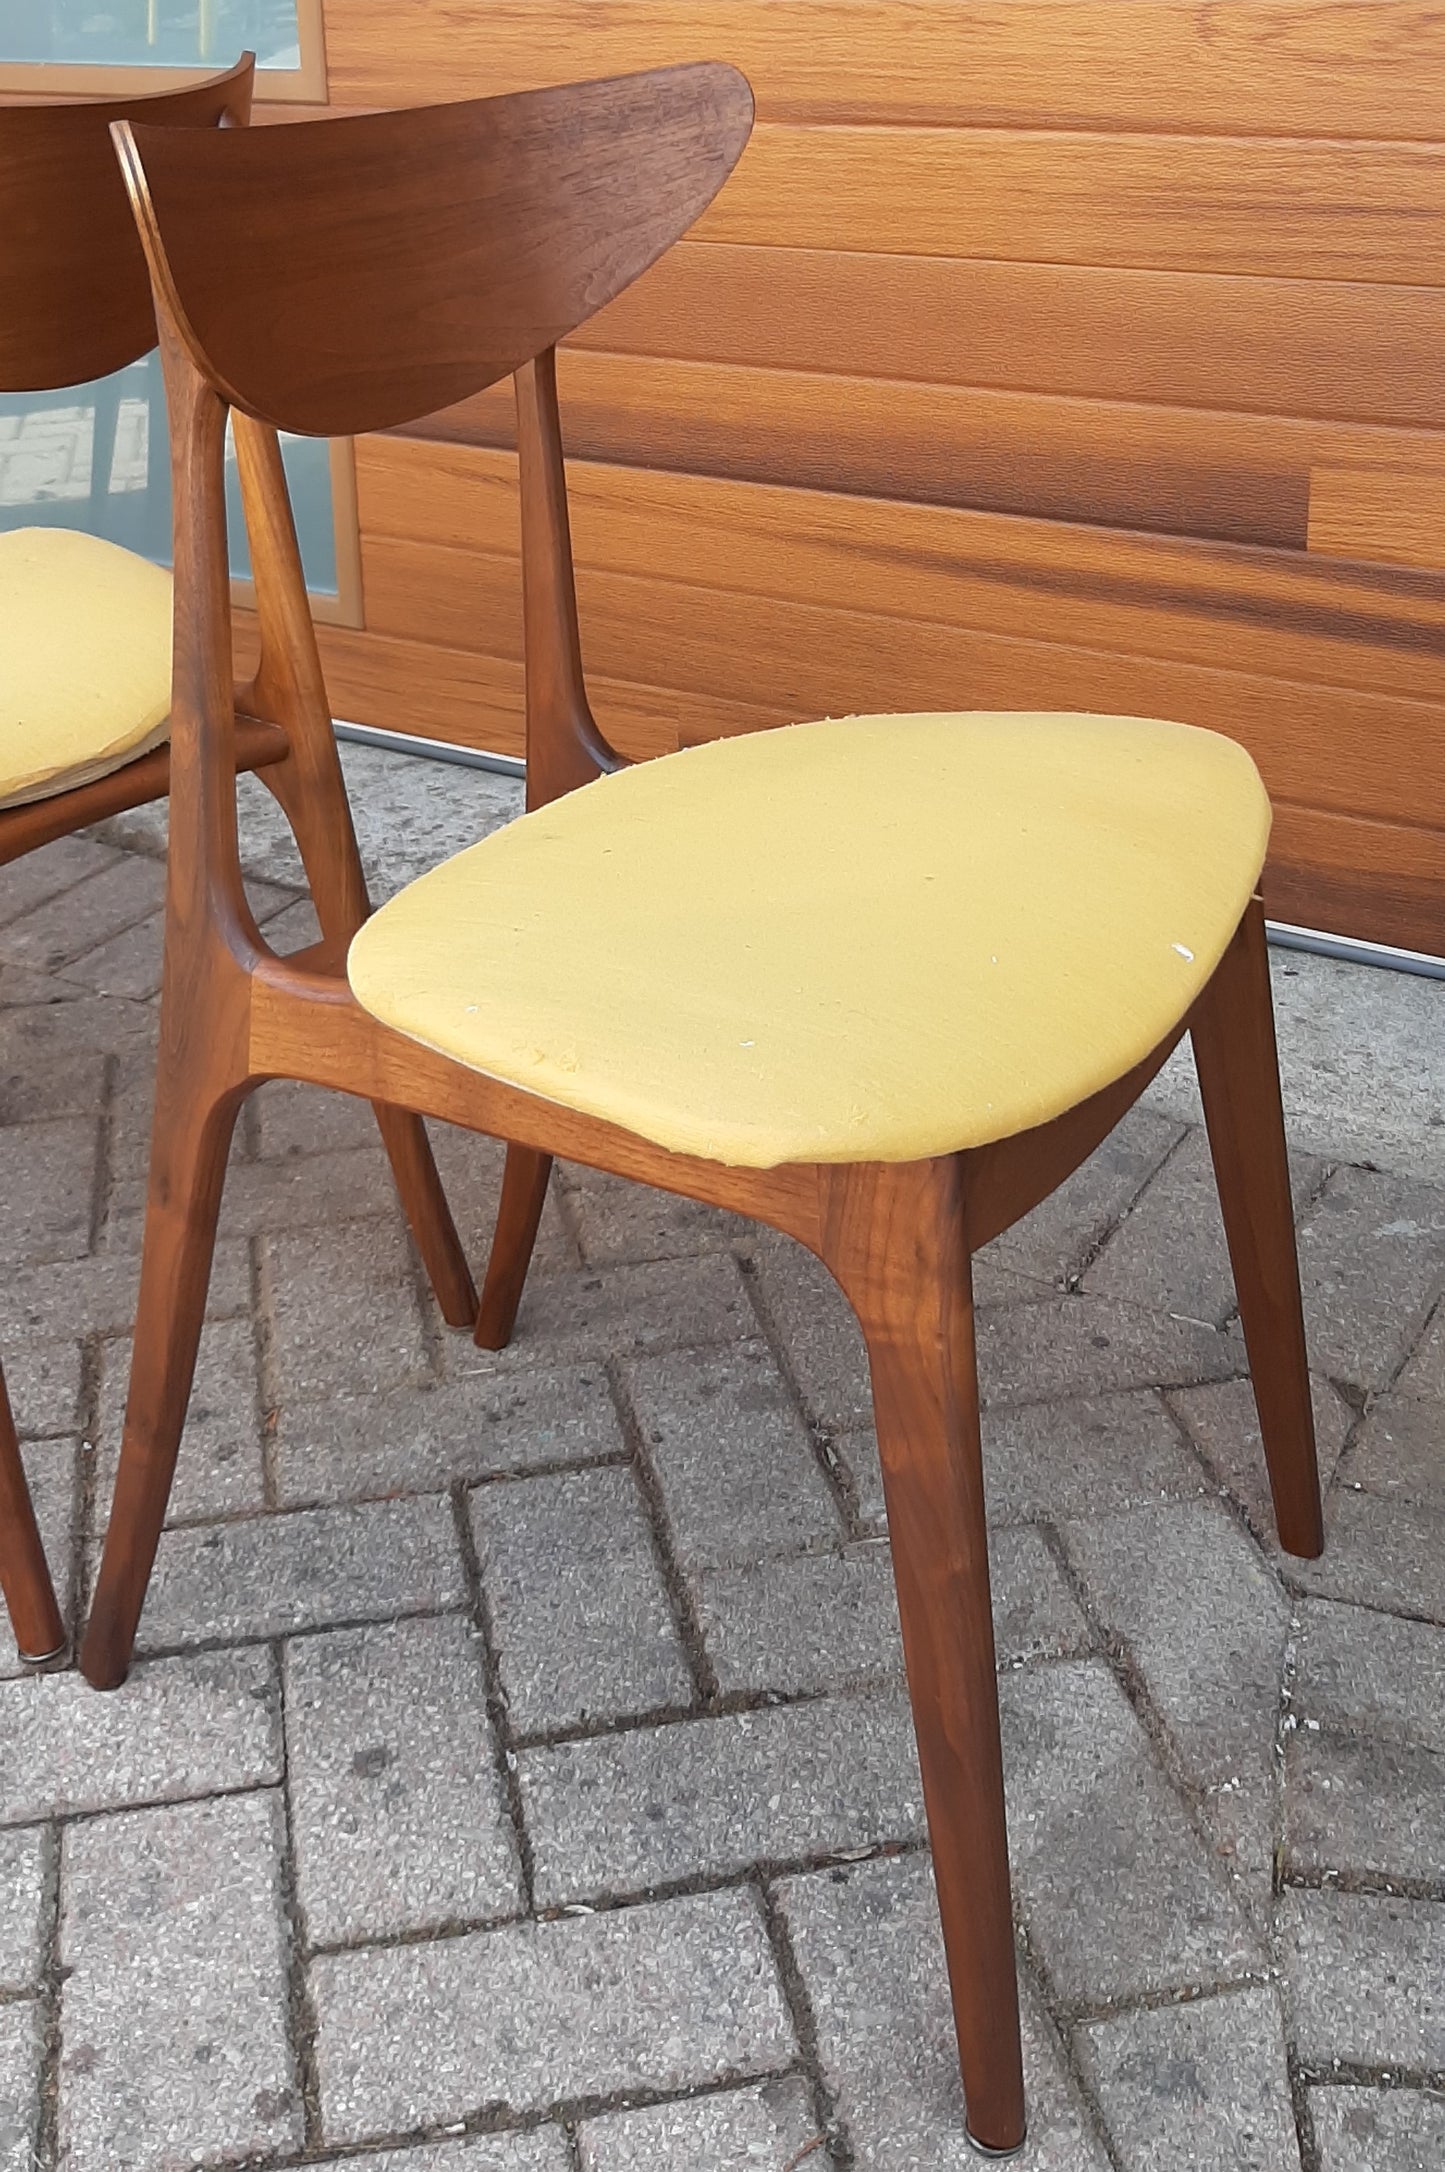 4 REFINISHED Mid Century Modern Walnut Chairs will be REUPHOLSTERED